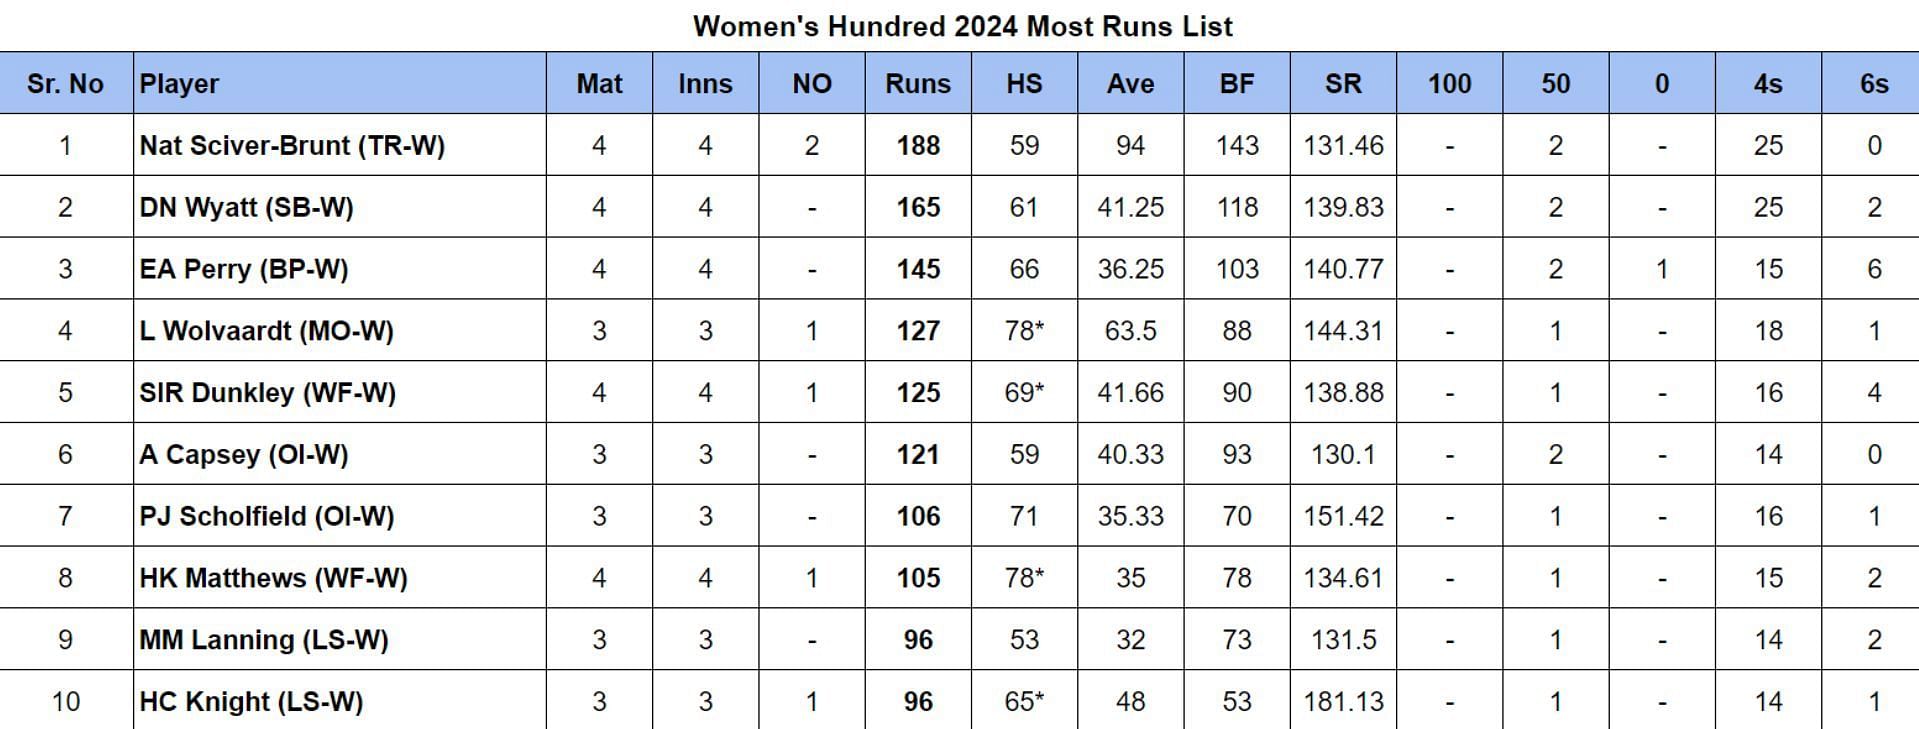 The Hundred Women's 2024 Most Runs and Most Wickets after Trent Rockets vs Welsh Fire (Updated) ft. Nat Sciver Brunt & Ellyse Perry